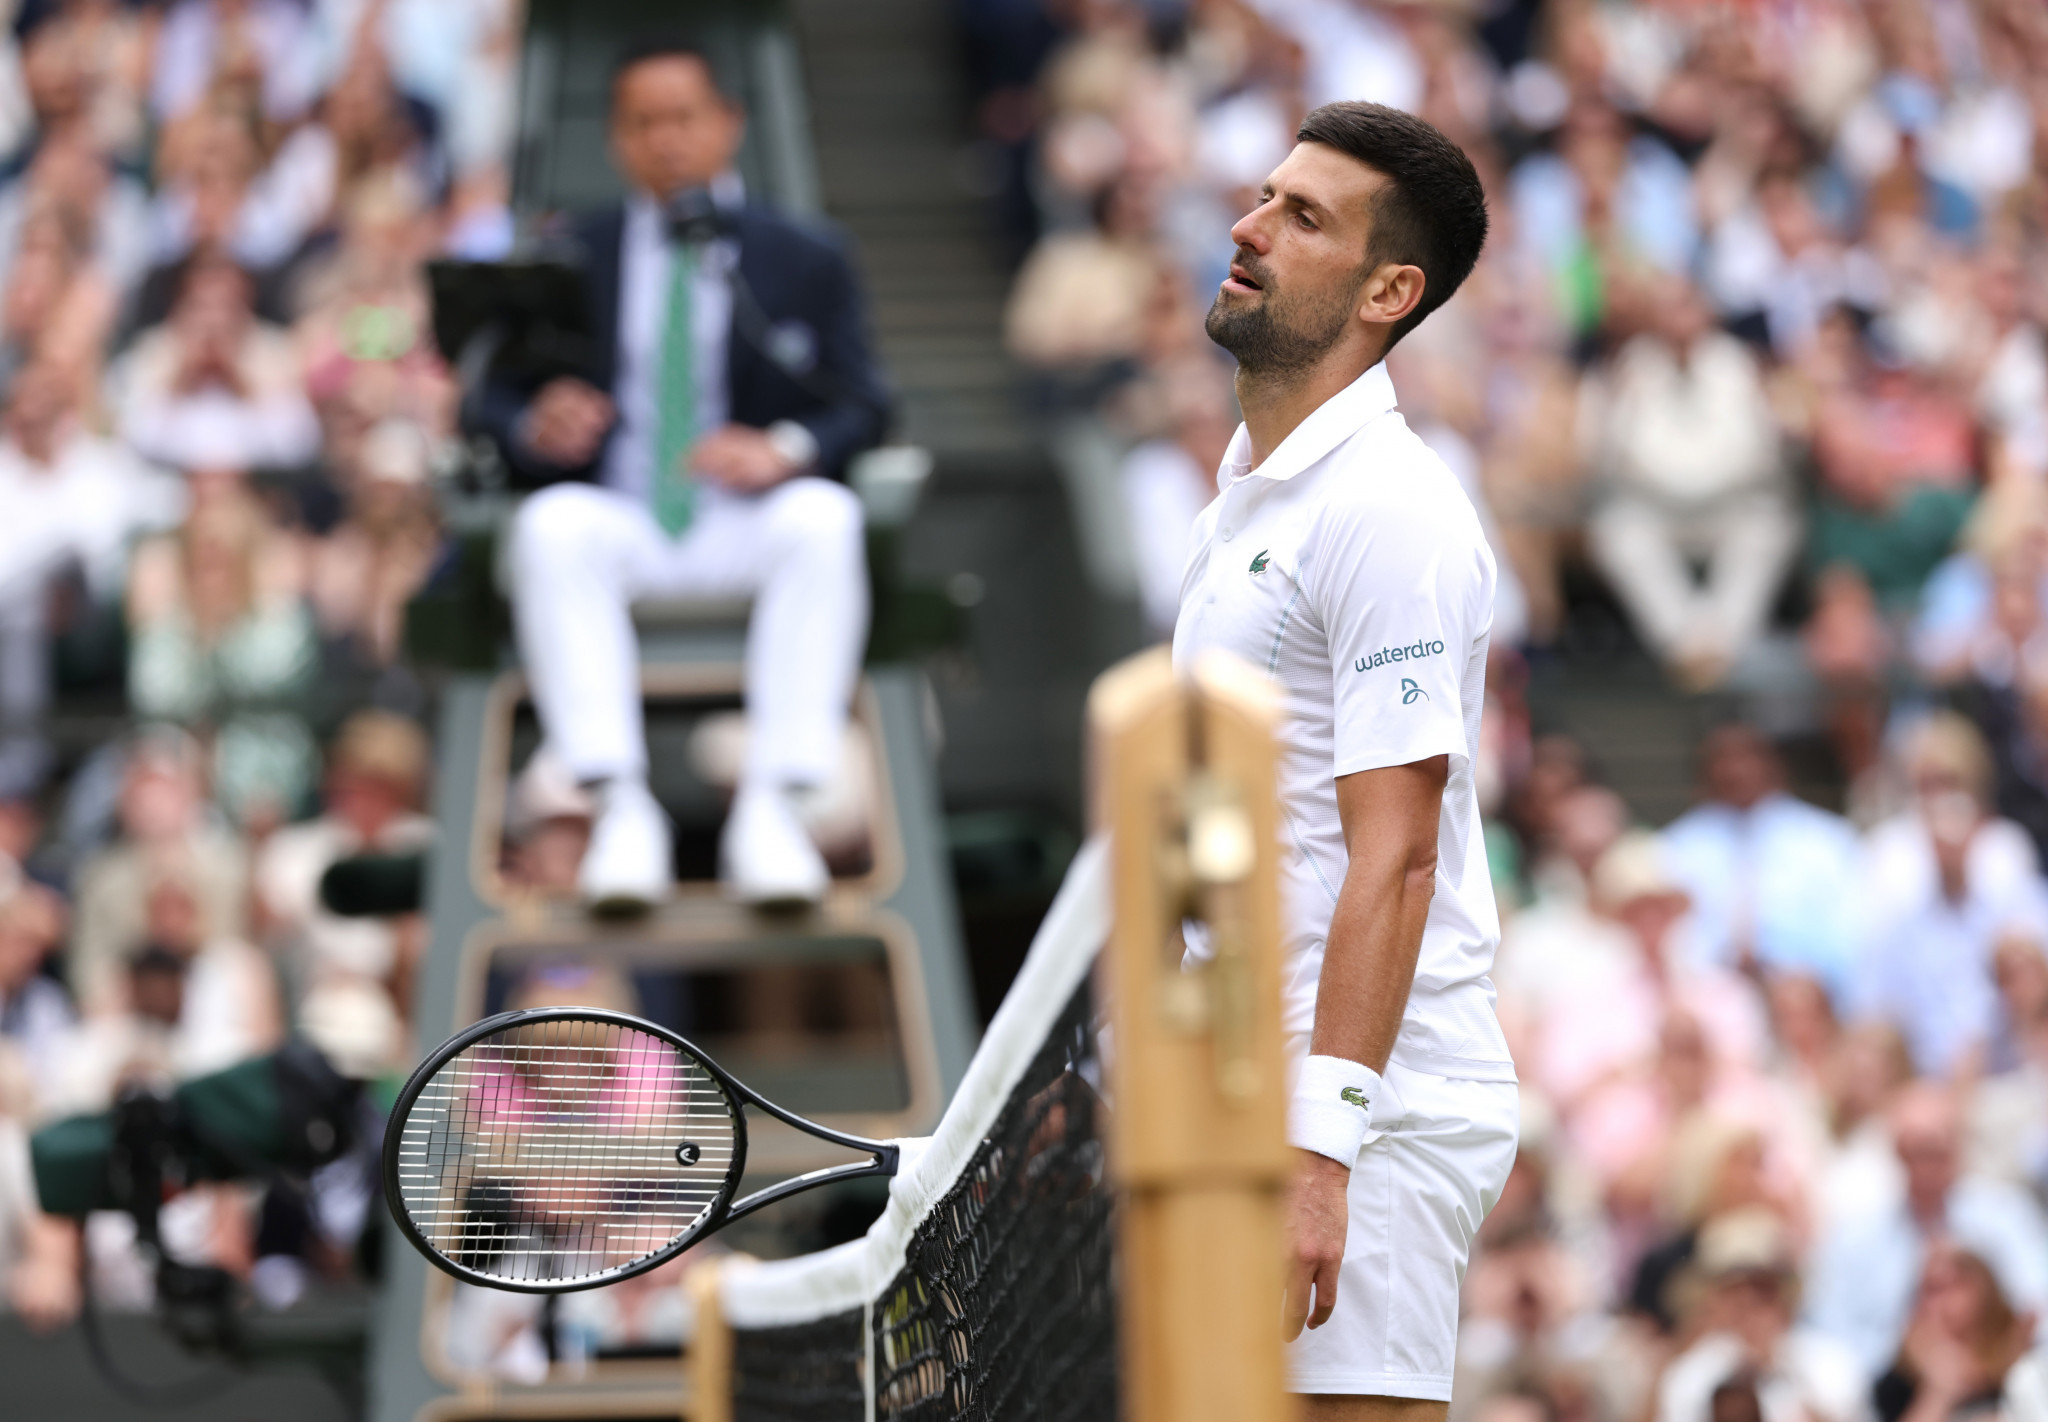 Novak Djokovic looked out-of-sorts and struggled to cope with the Spaniard on Centre Court. GETTY IMAGES